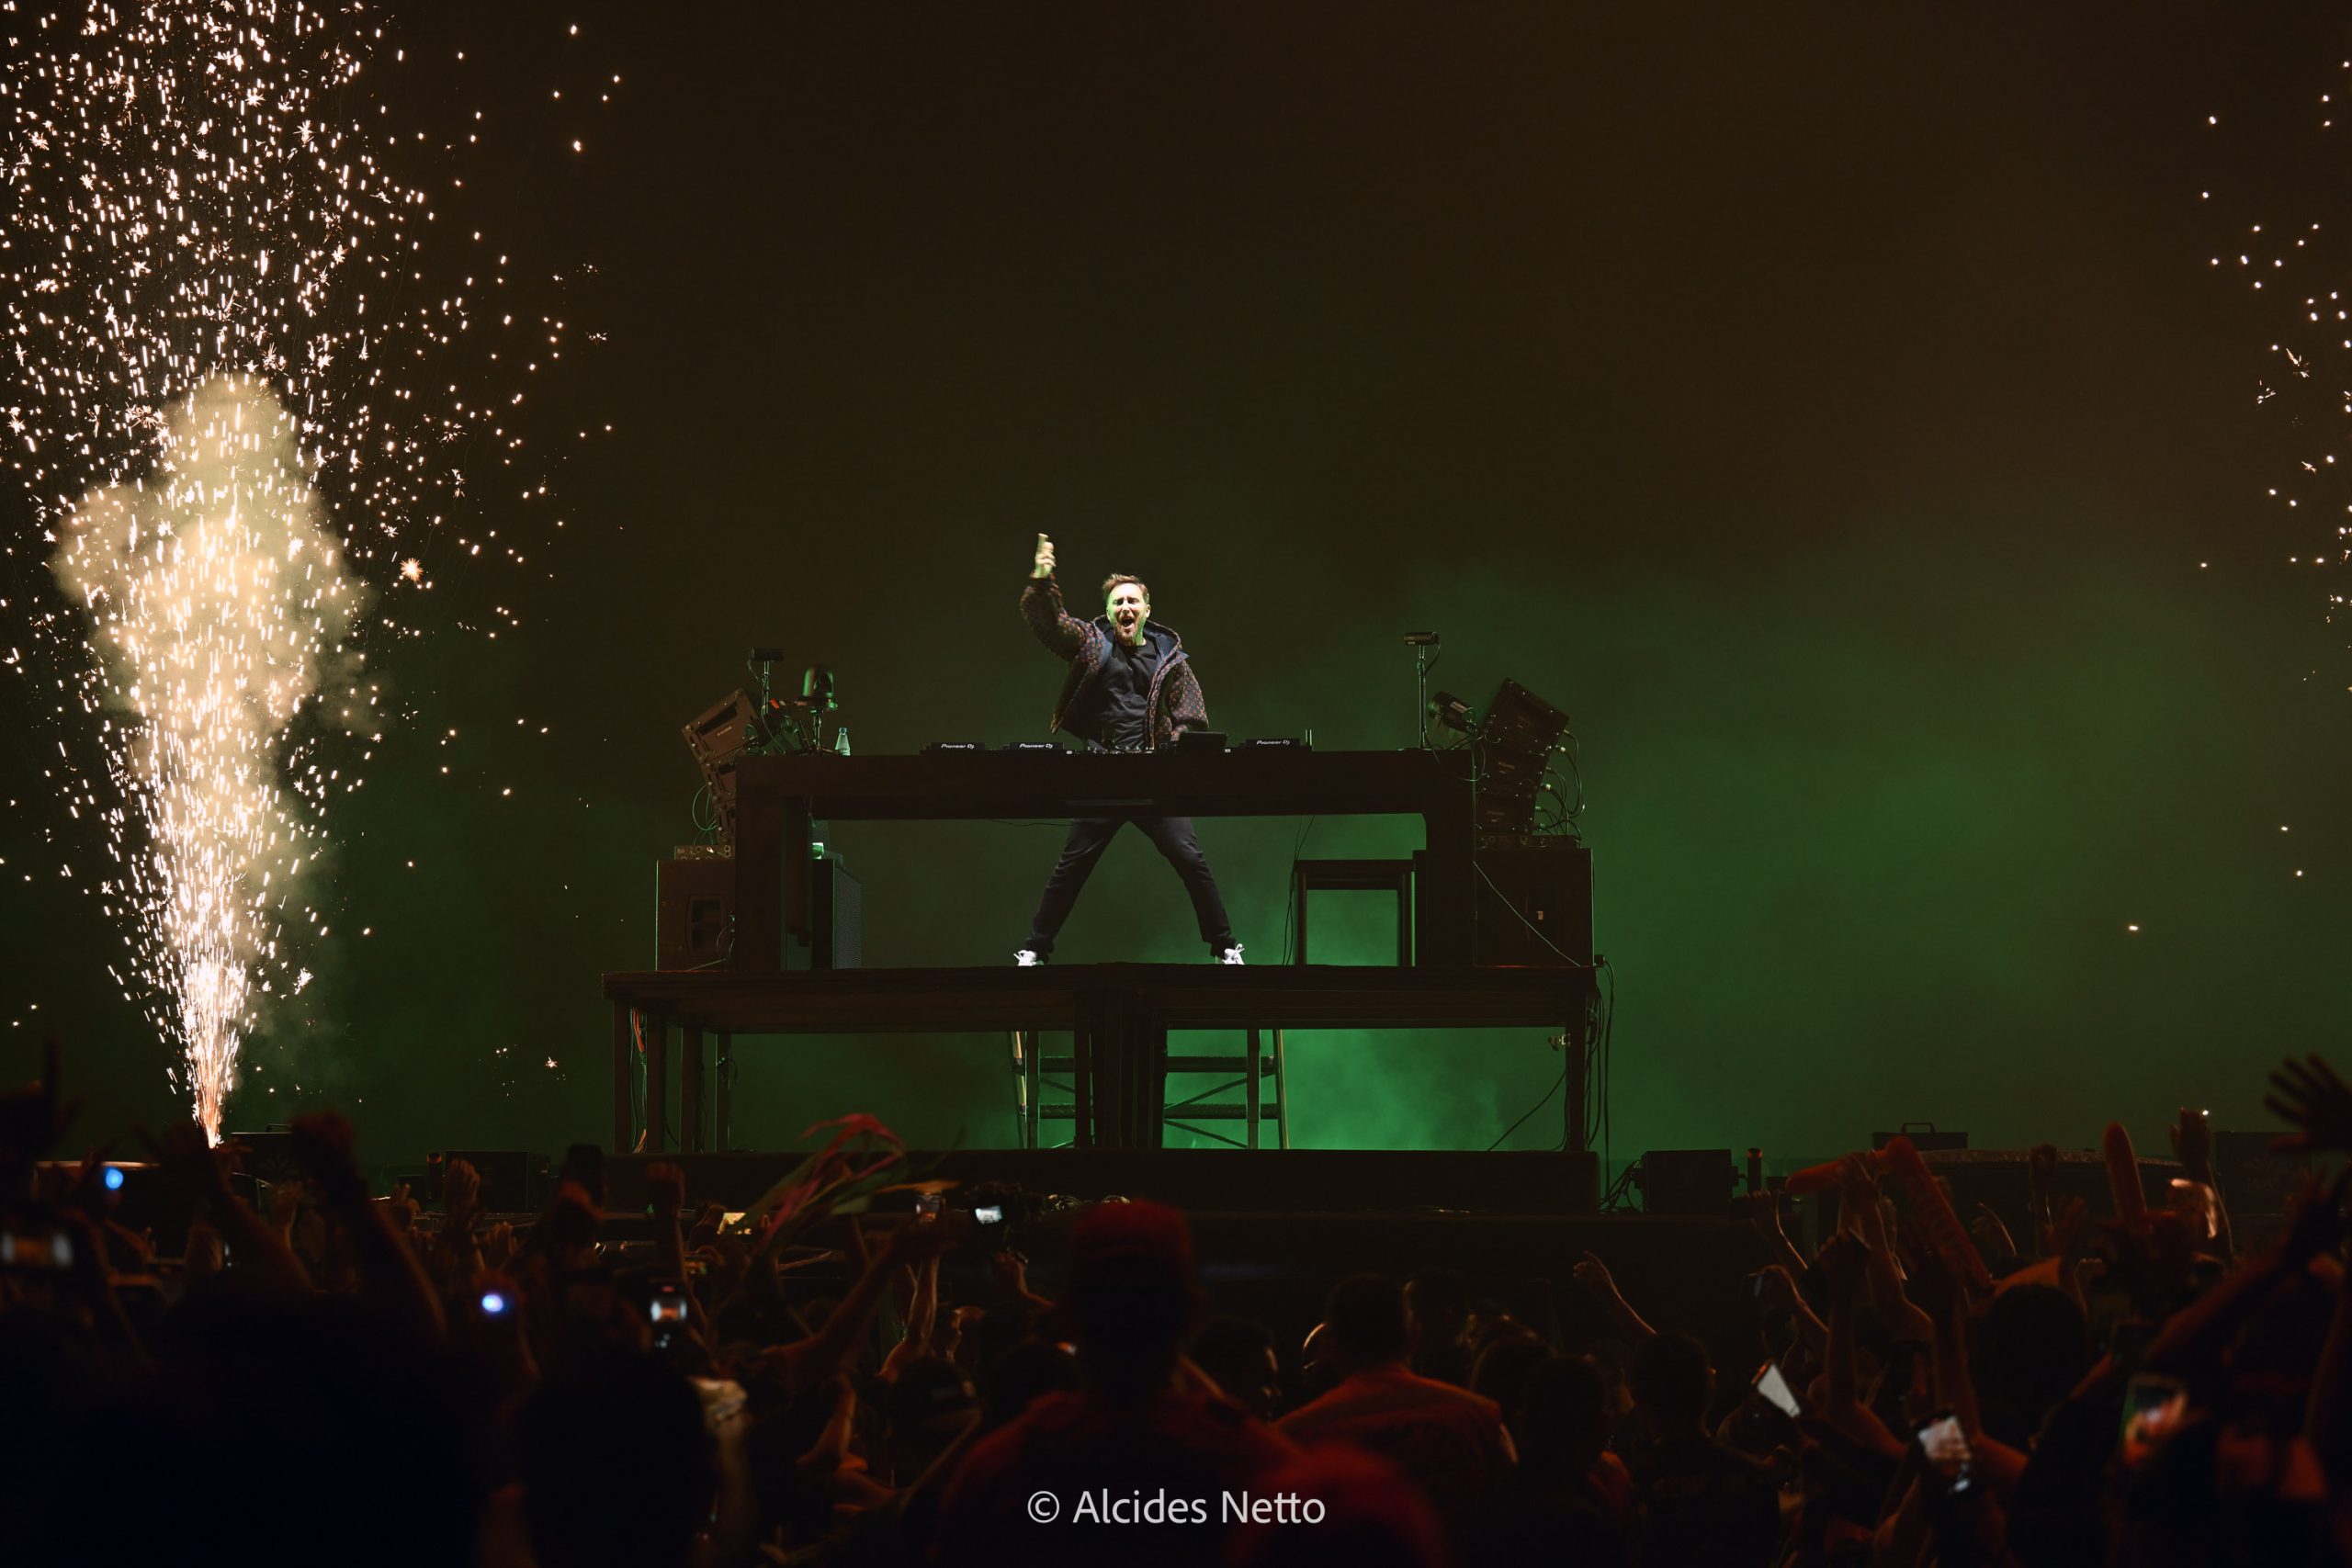 David Guetta says Manaus was another level and thanks you for the love and energy at the festival